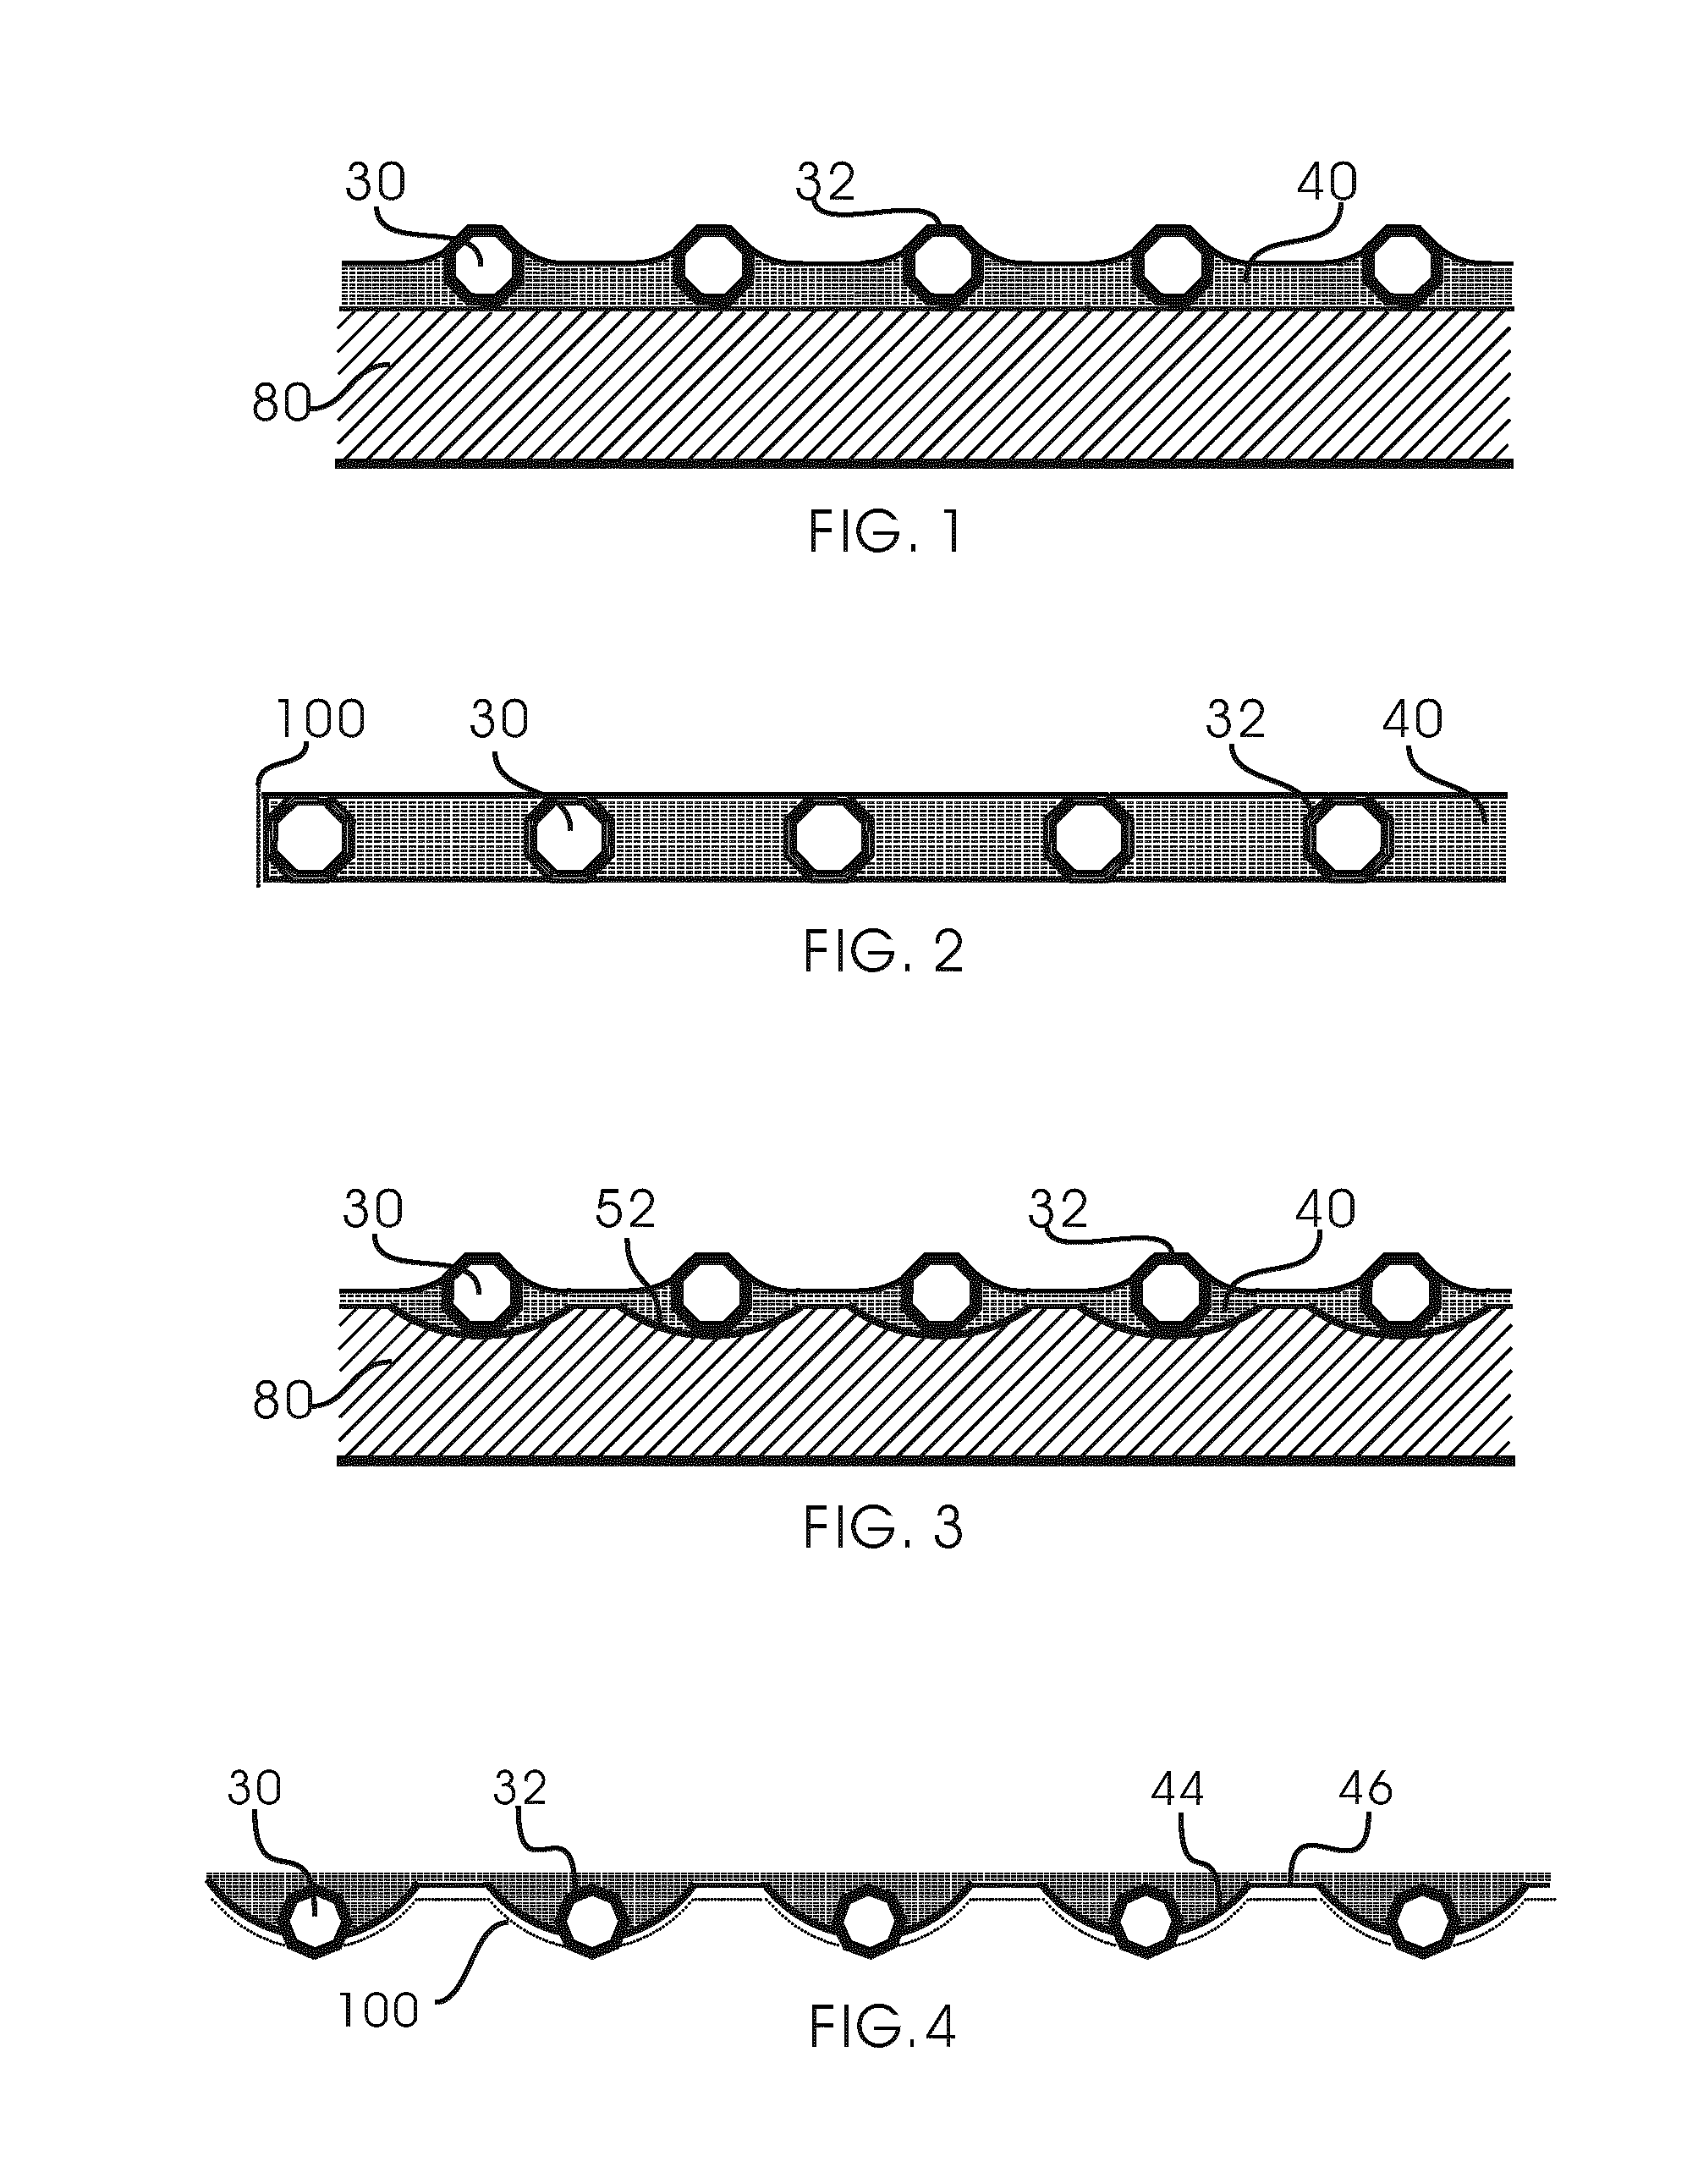 Abrasive article and method for making the same